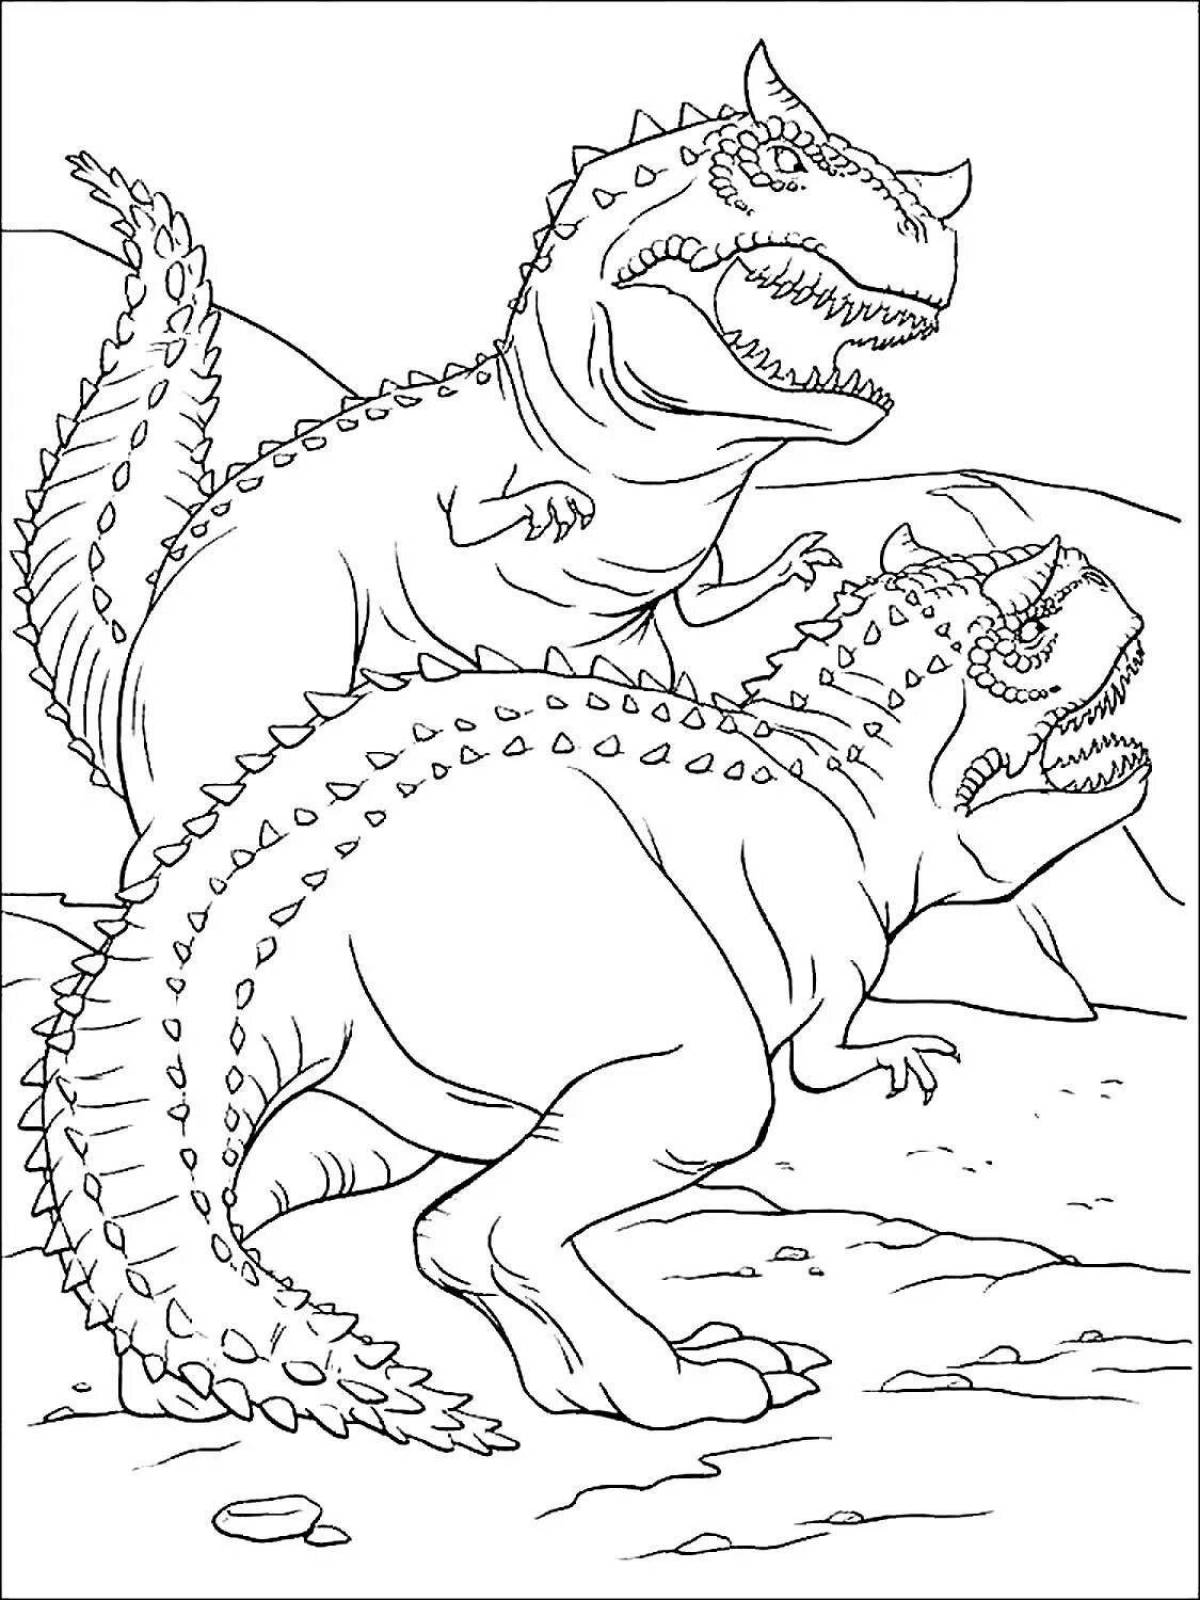 Funny dinosaur coloring pages